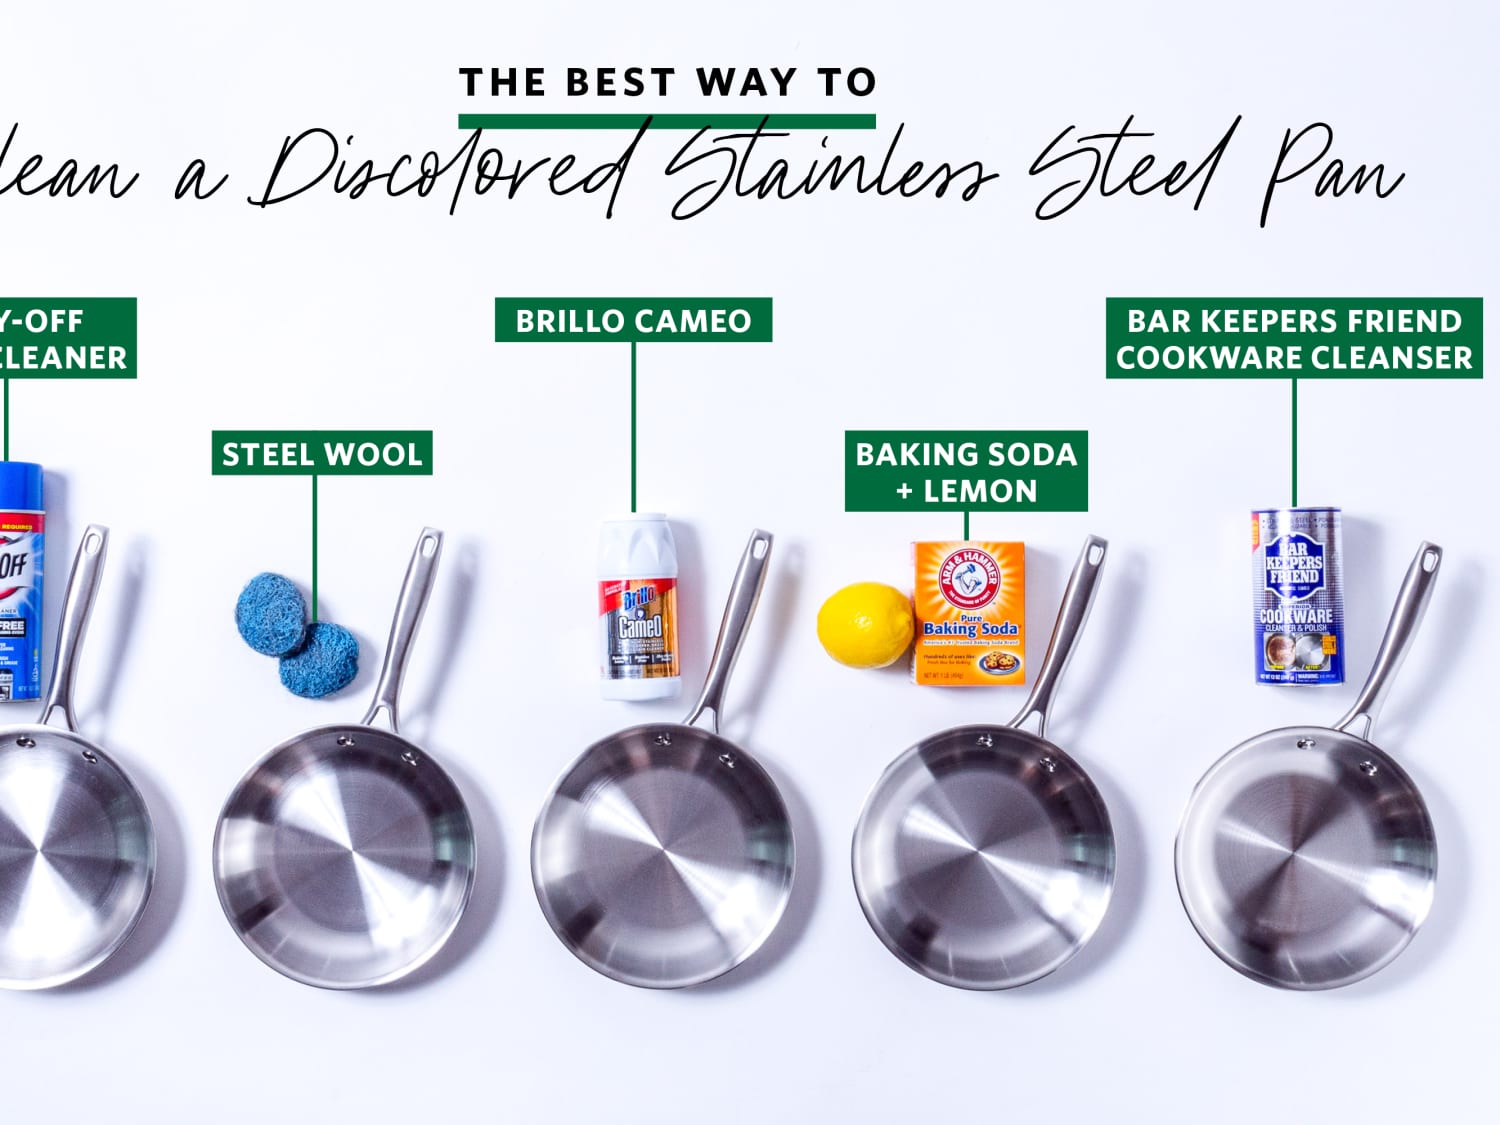 We Tried 5 Methods for Discolored Stainless Steel Pans | Kitchn